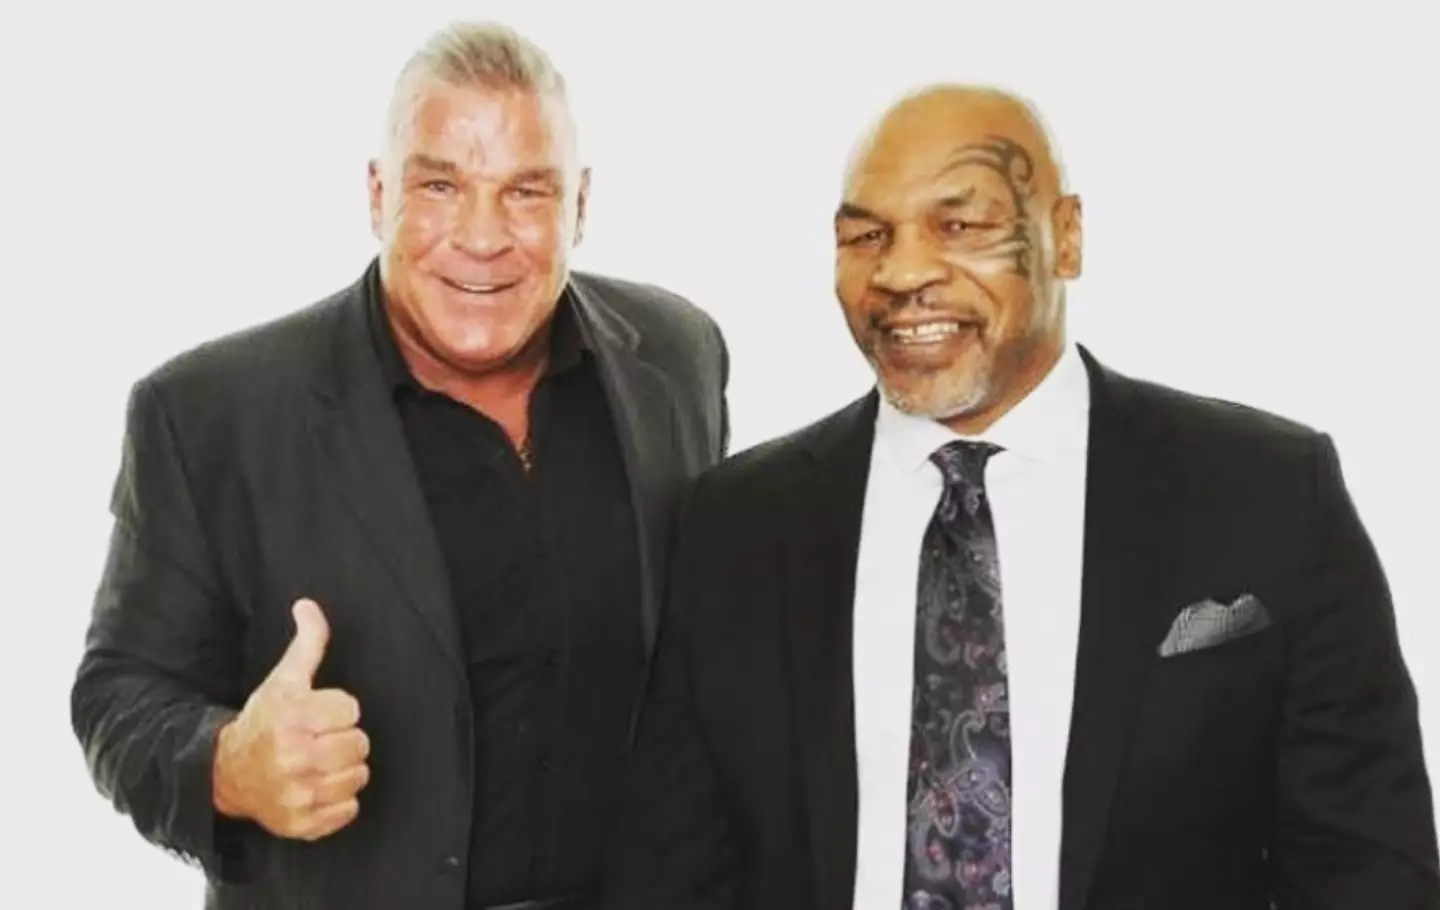 The Irishman was dubbed the 'toughest white man on the planet' by his pal Mike Tyson.